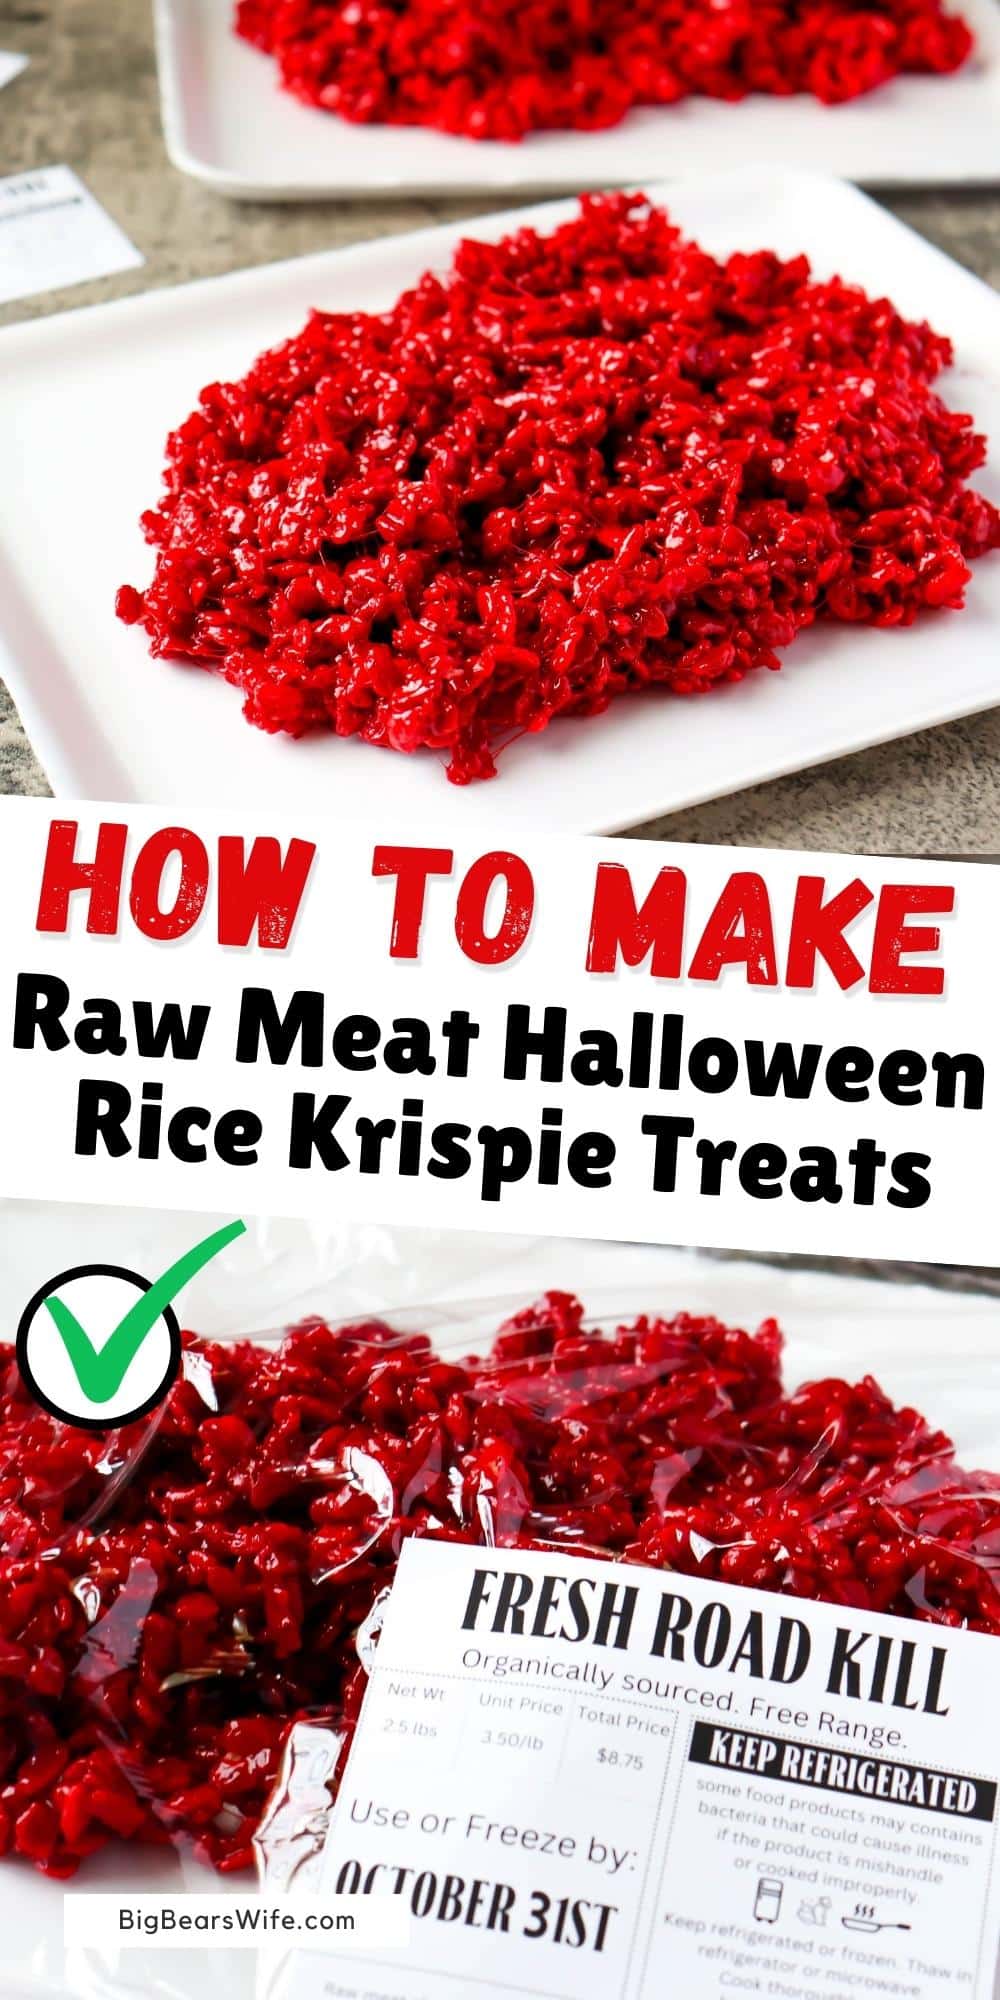 Creepy out your friends and family by serving up platters of Raw Meat Halloween Rice Krispie Treats this year for Halloween! Red Velvet Rice Krispie Treats serves on (clean and unused) meat trays with "road kill" labels will have them running for the hills! via @bigbearswife